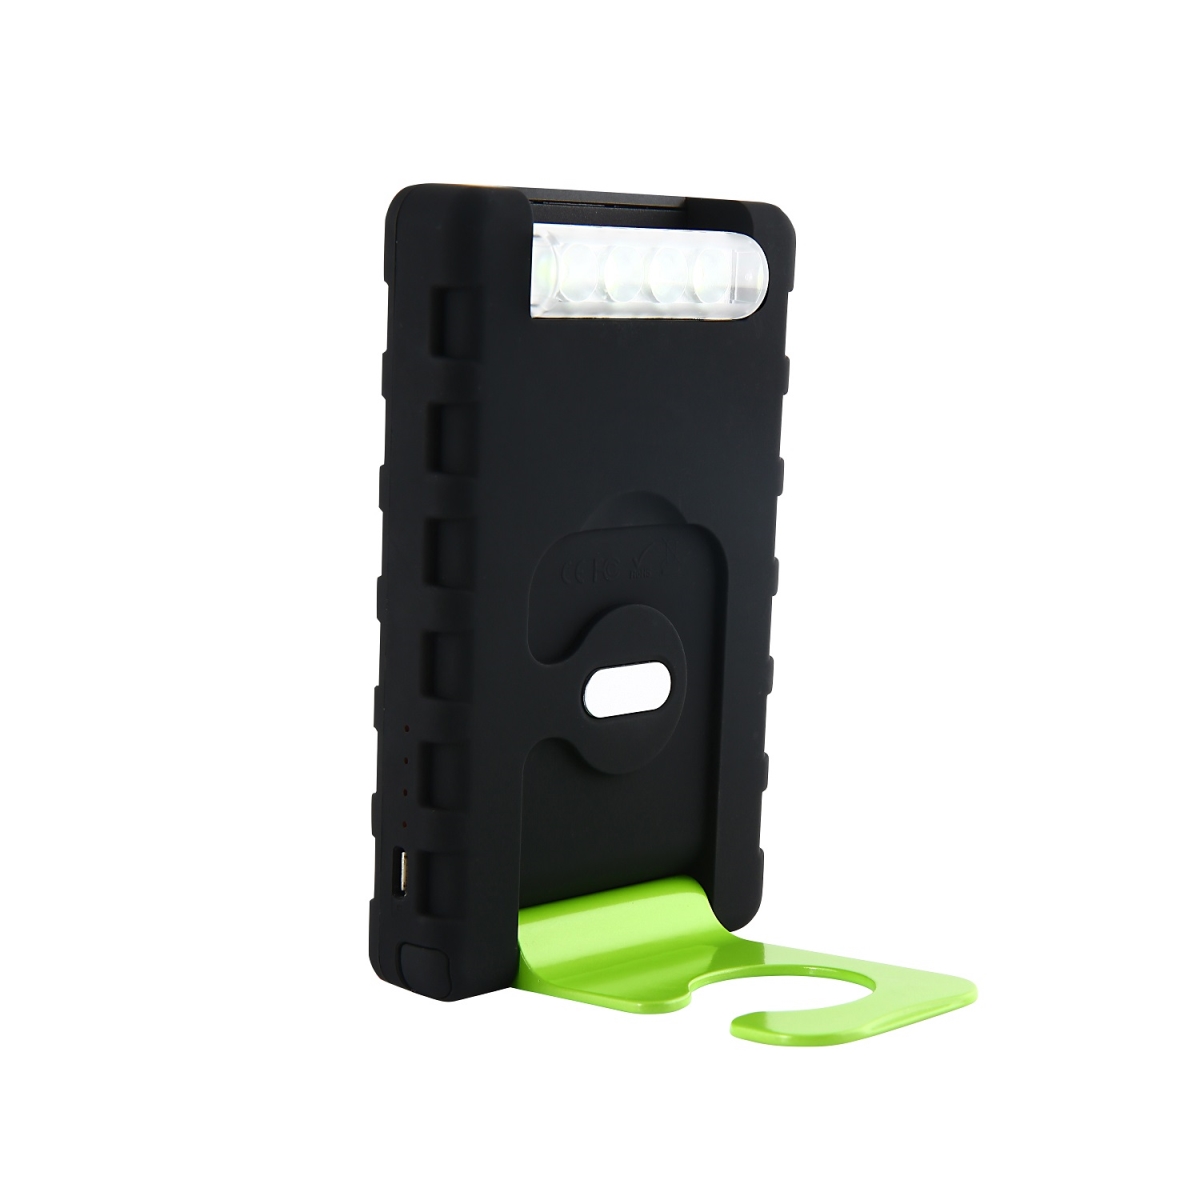 Mpowerpad Tuff Solar Charger And Light 3000 Mah